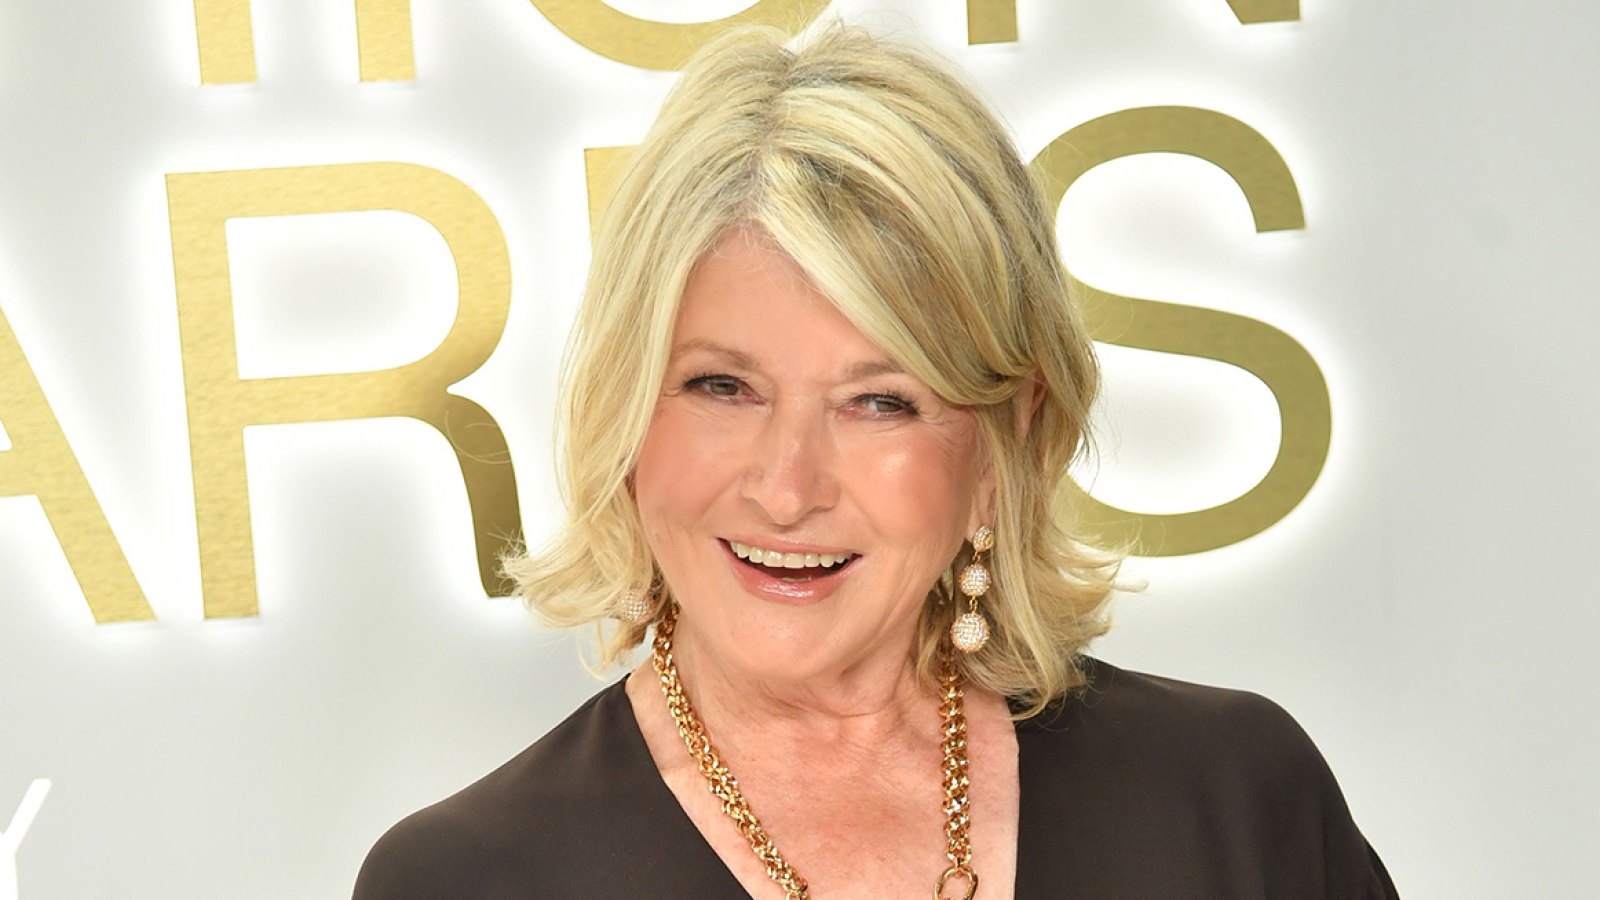 Martha Stewart: 25 Things You Don't Know About Me